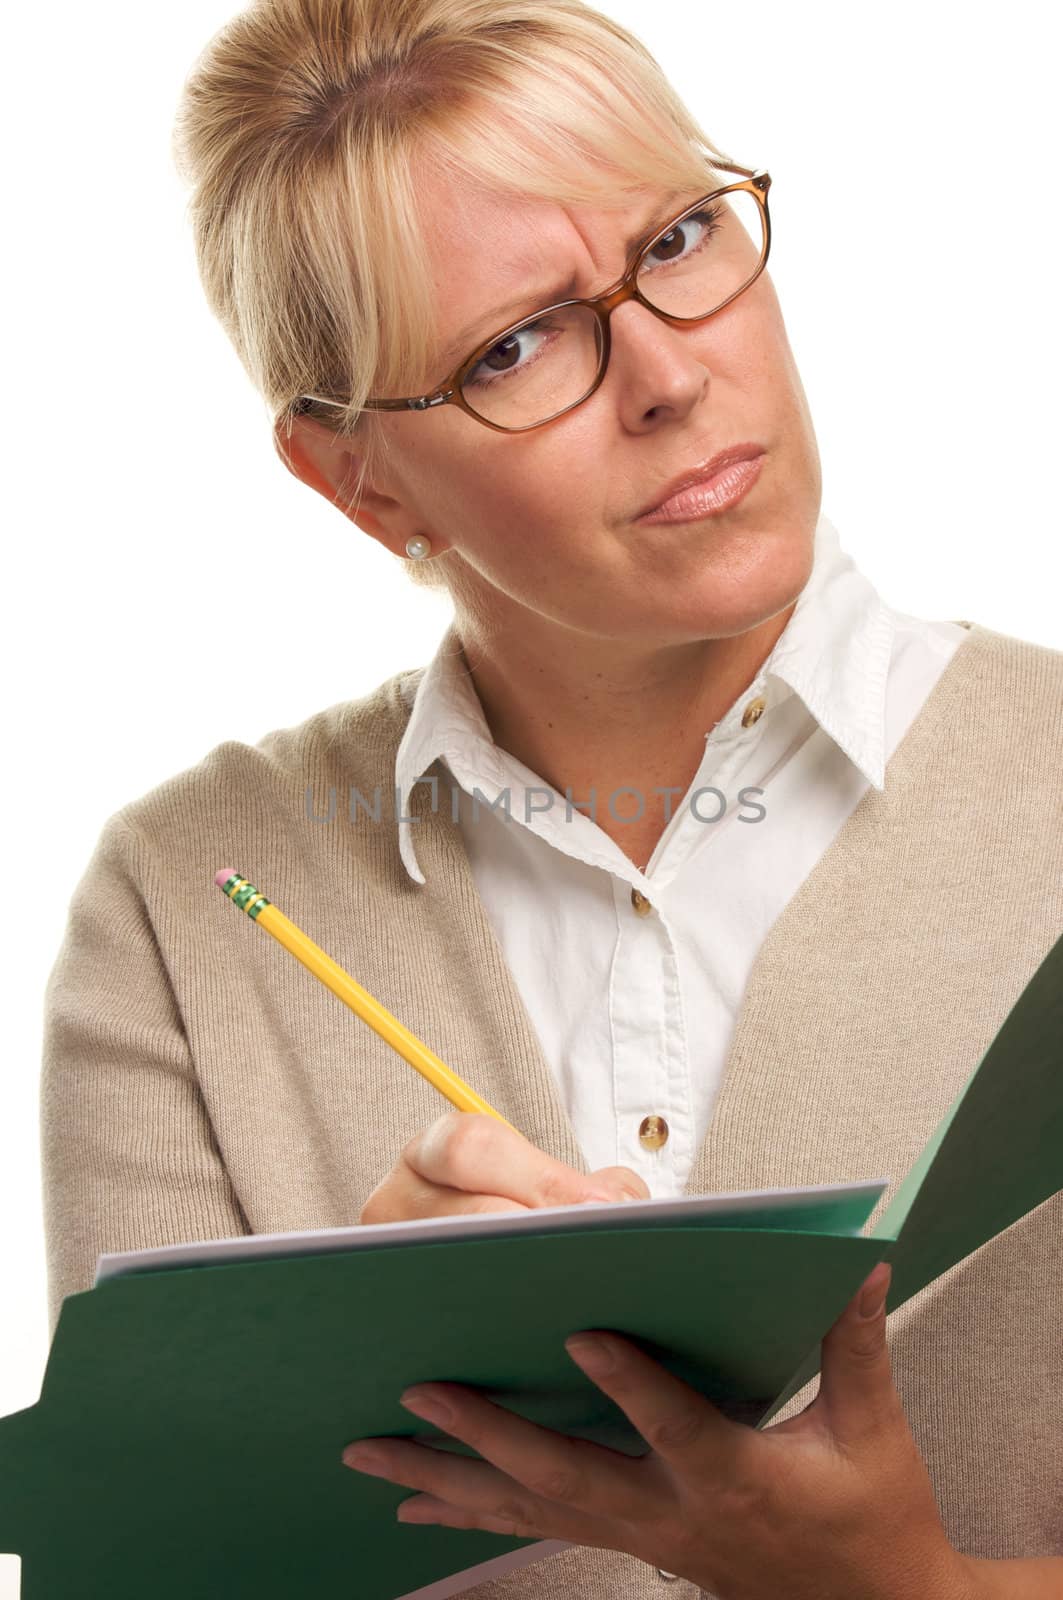 Beautiful Woman with Pencil and Folder taking notes.